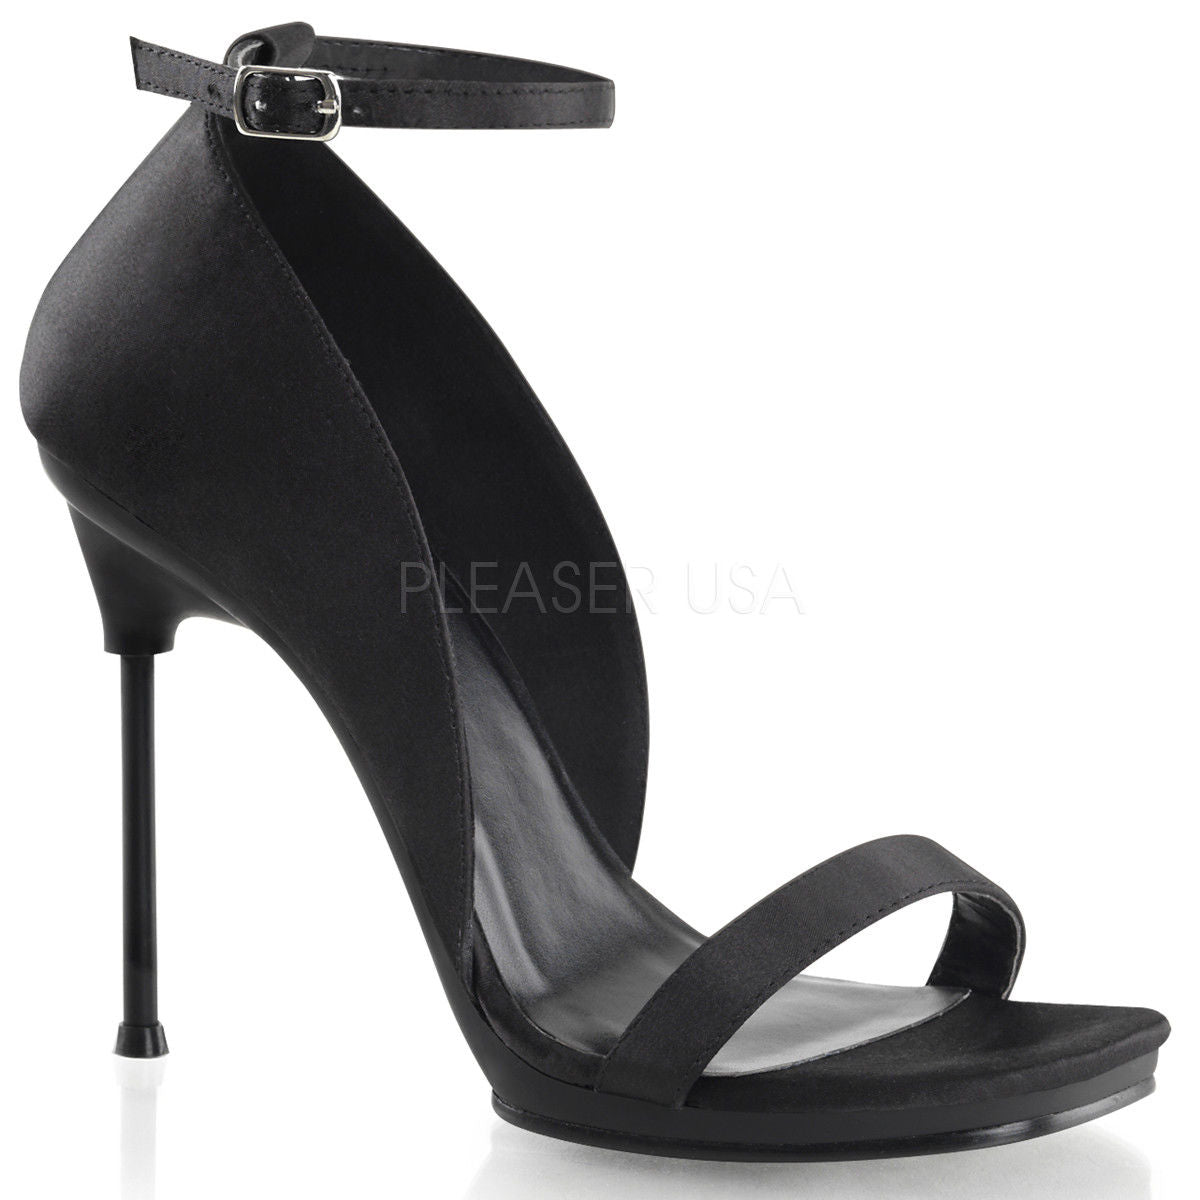 Discontinued FABULICIOUS Chic-35 Satin D'Orsay Formal Evening Party 4.5" Heels - A Shoe Addiction